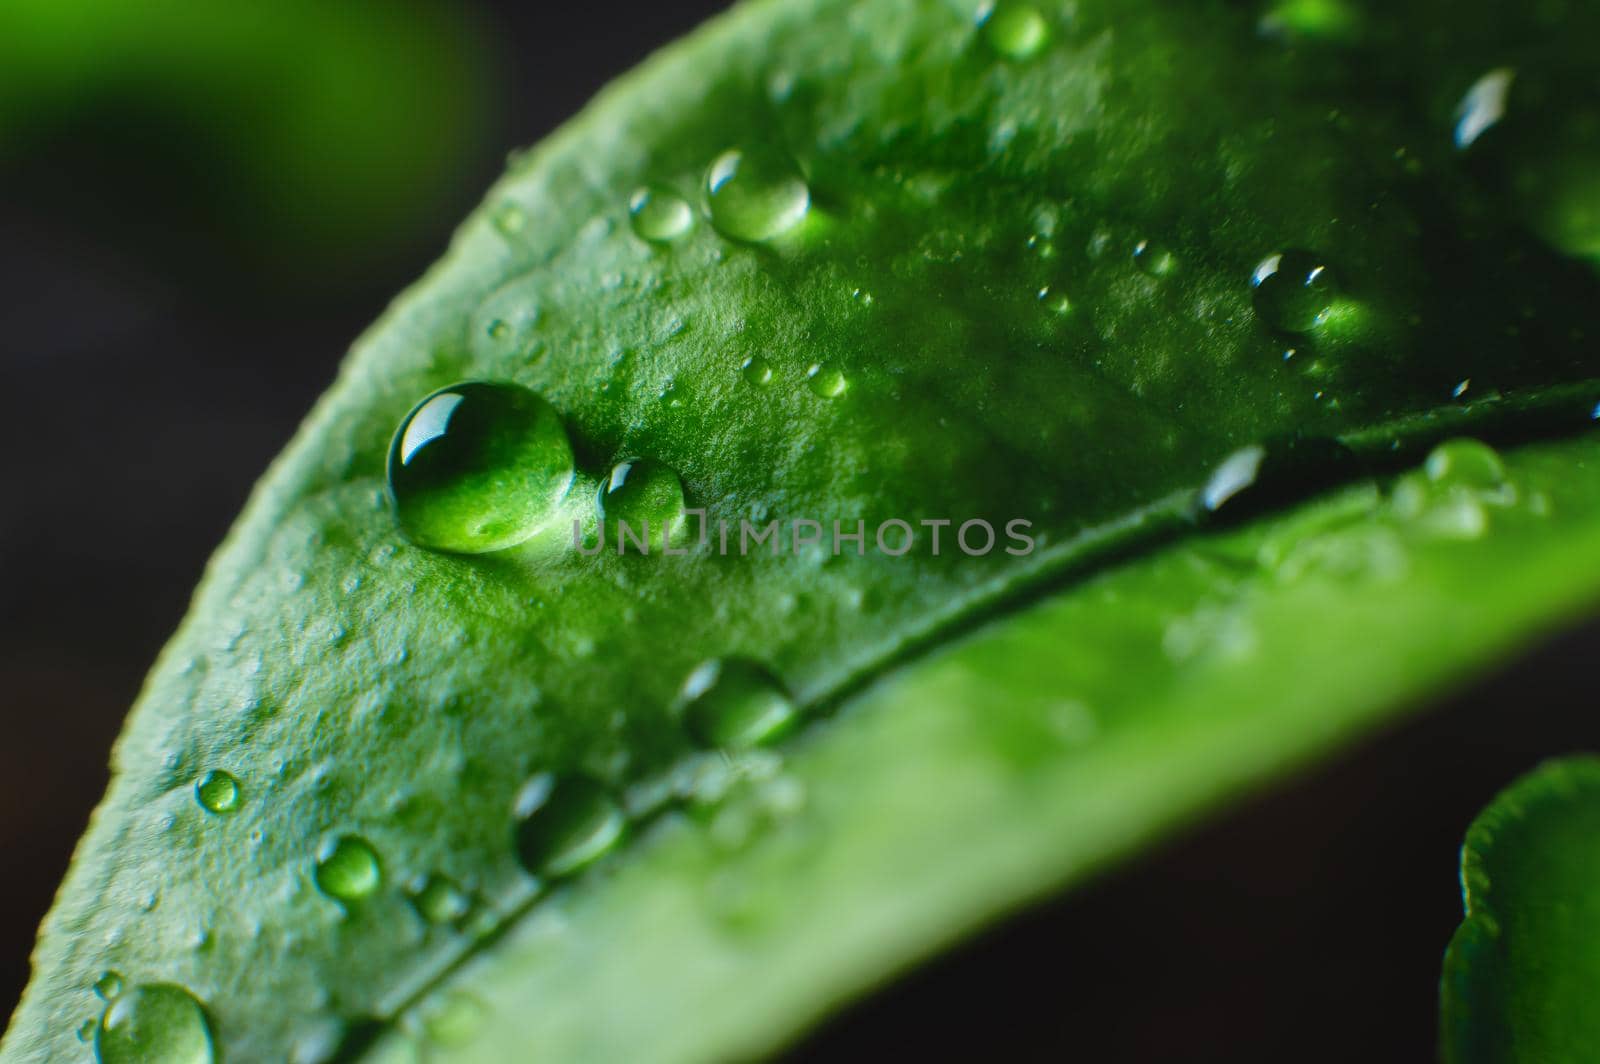 Beauty transparent water drop on green leaves macro with sun glare. A beautiful artistic depiction of a fresh nature environment in spring or summer. high contrast.